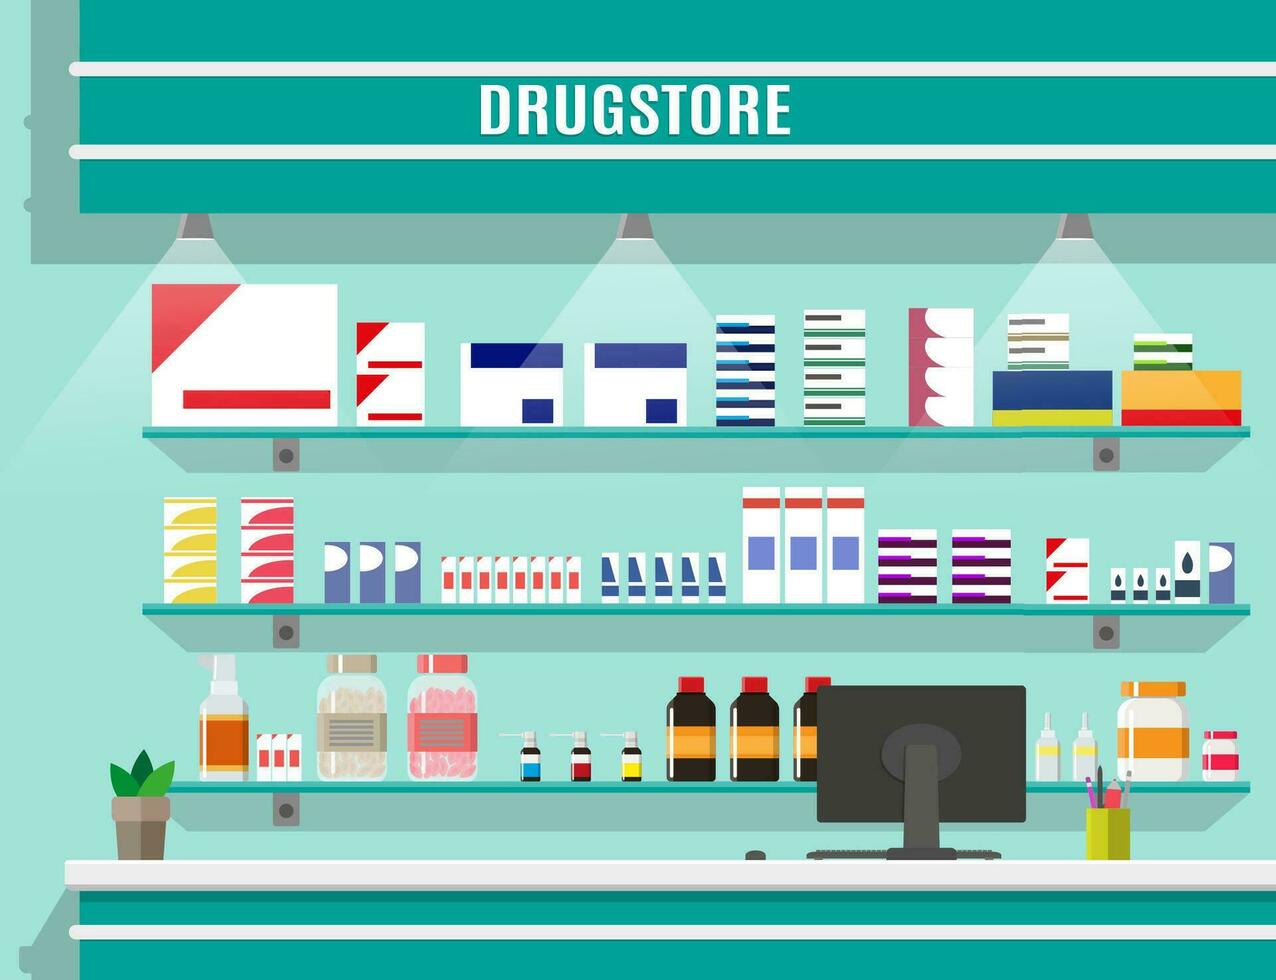 Modern interior pharmacy or drugstore. Medicine pills capsules bottles vitamins and tablets. vector illustration in flat style